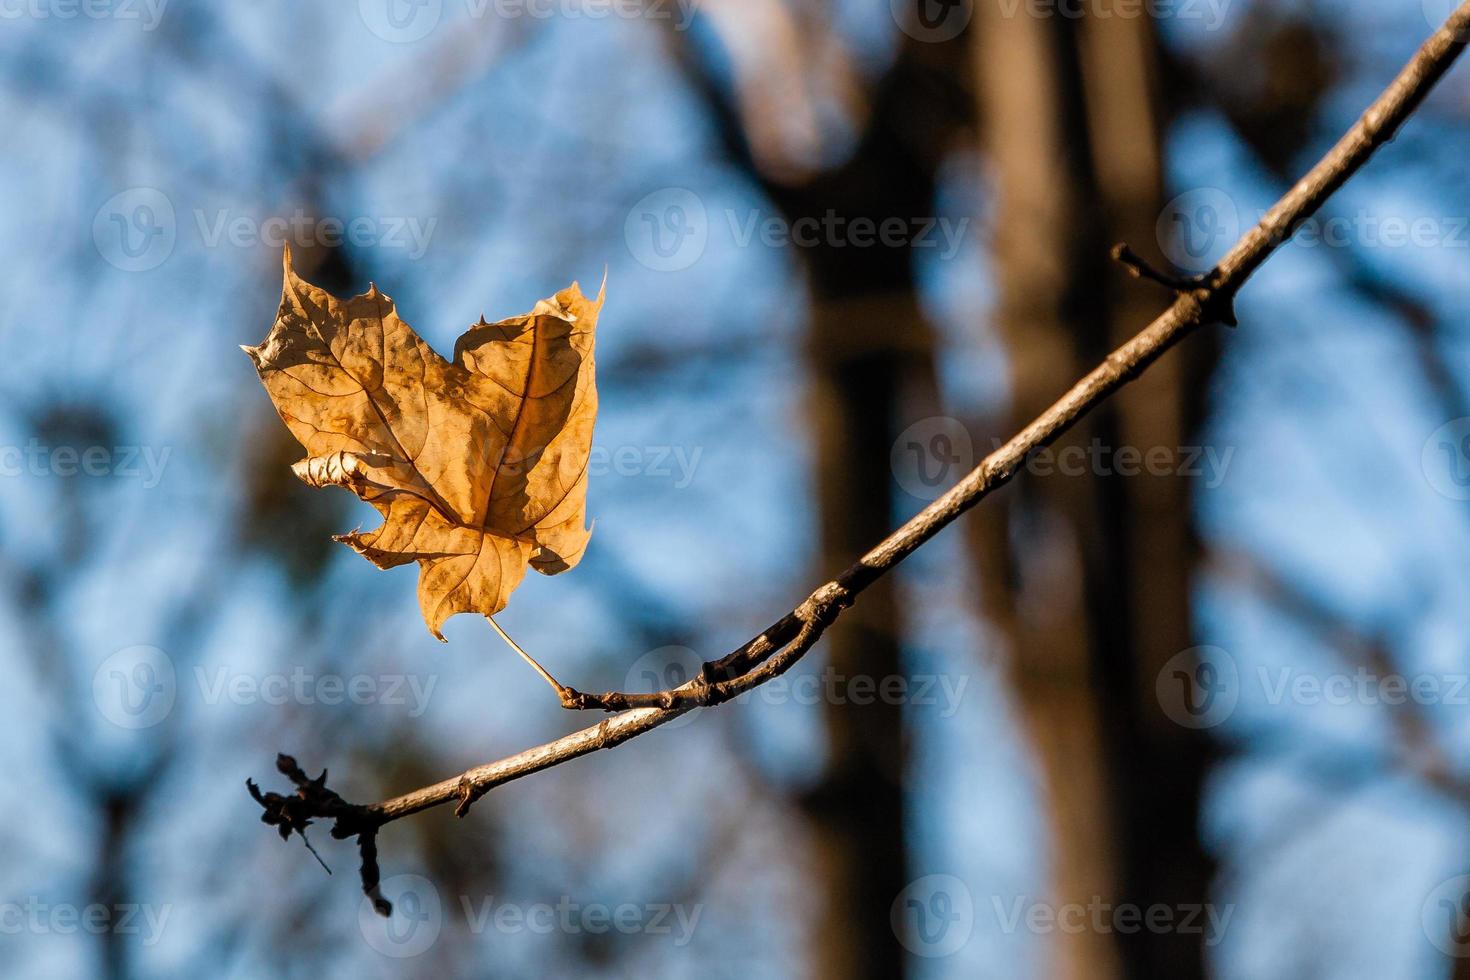 Autumn leaves on a branch in the sunlight close-up photo